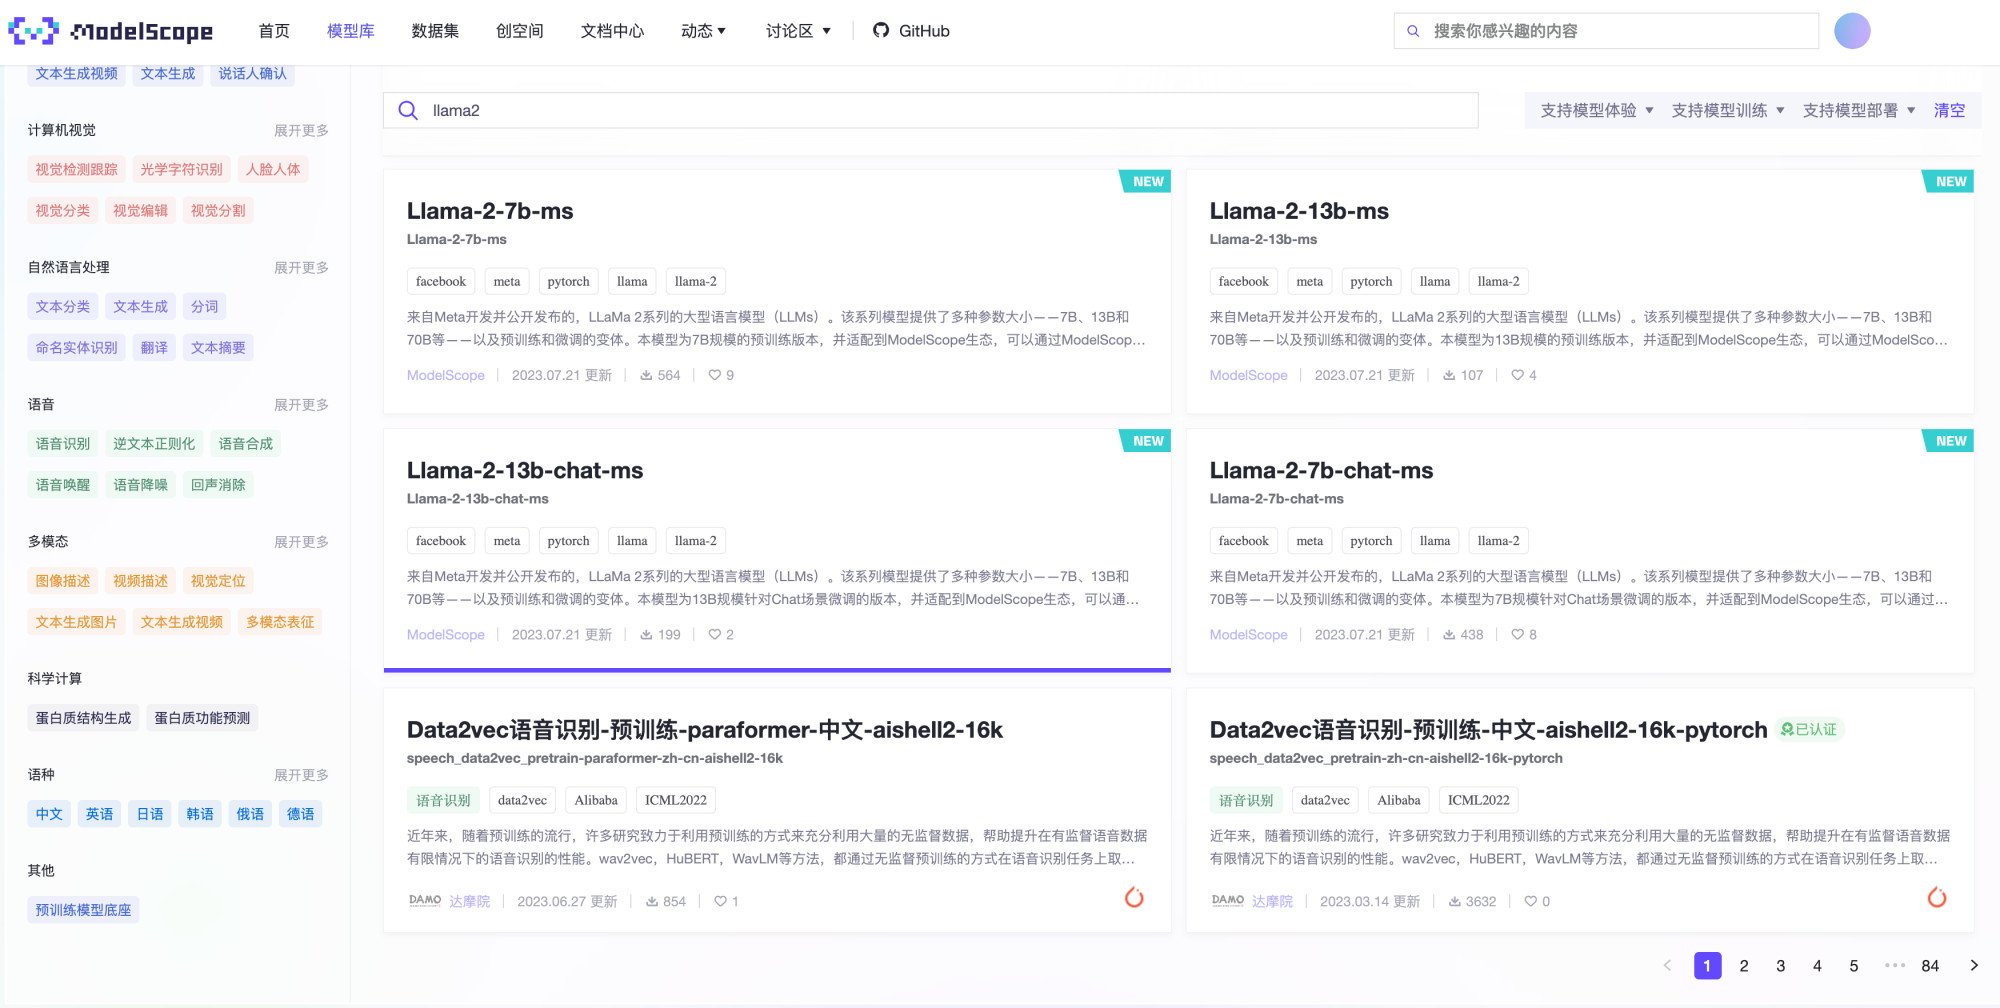 Alibaba Cloud’s ModelScope, an open-source artificial intelligence “model-as-a-service” platform, has extended support to Facebook parent Meta Platforms’ Llama 2 large language model. Photo: Handout